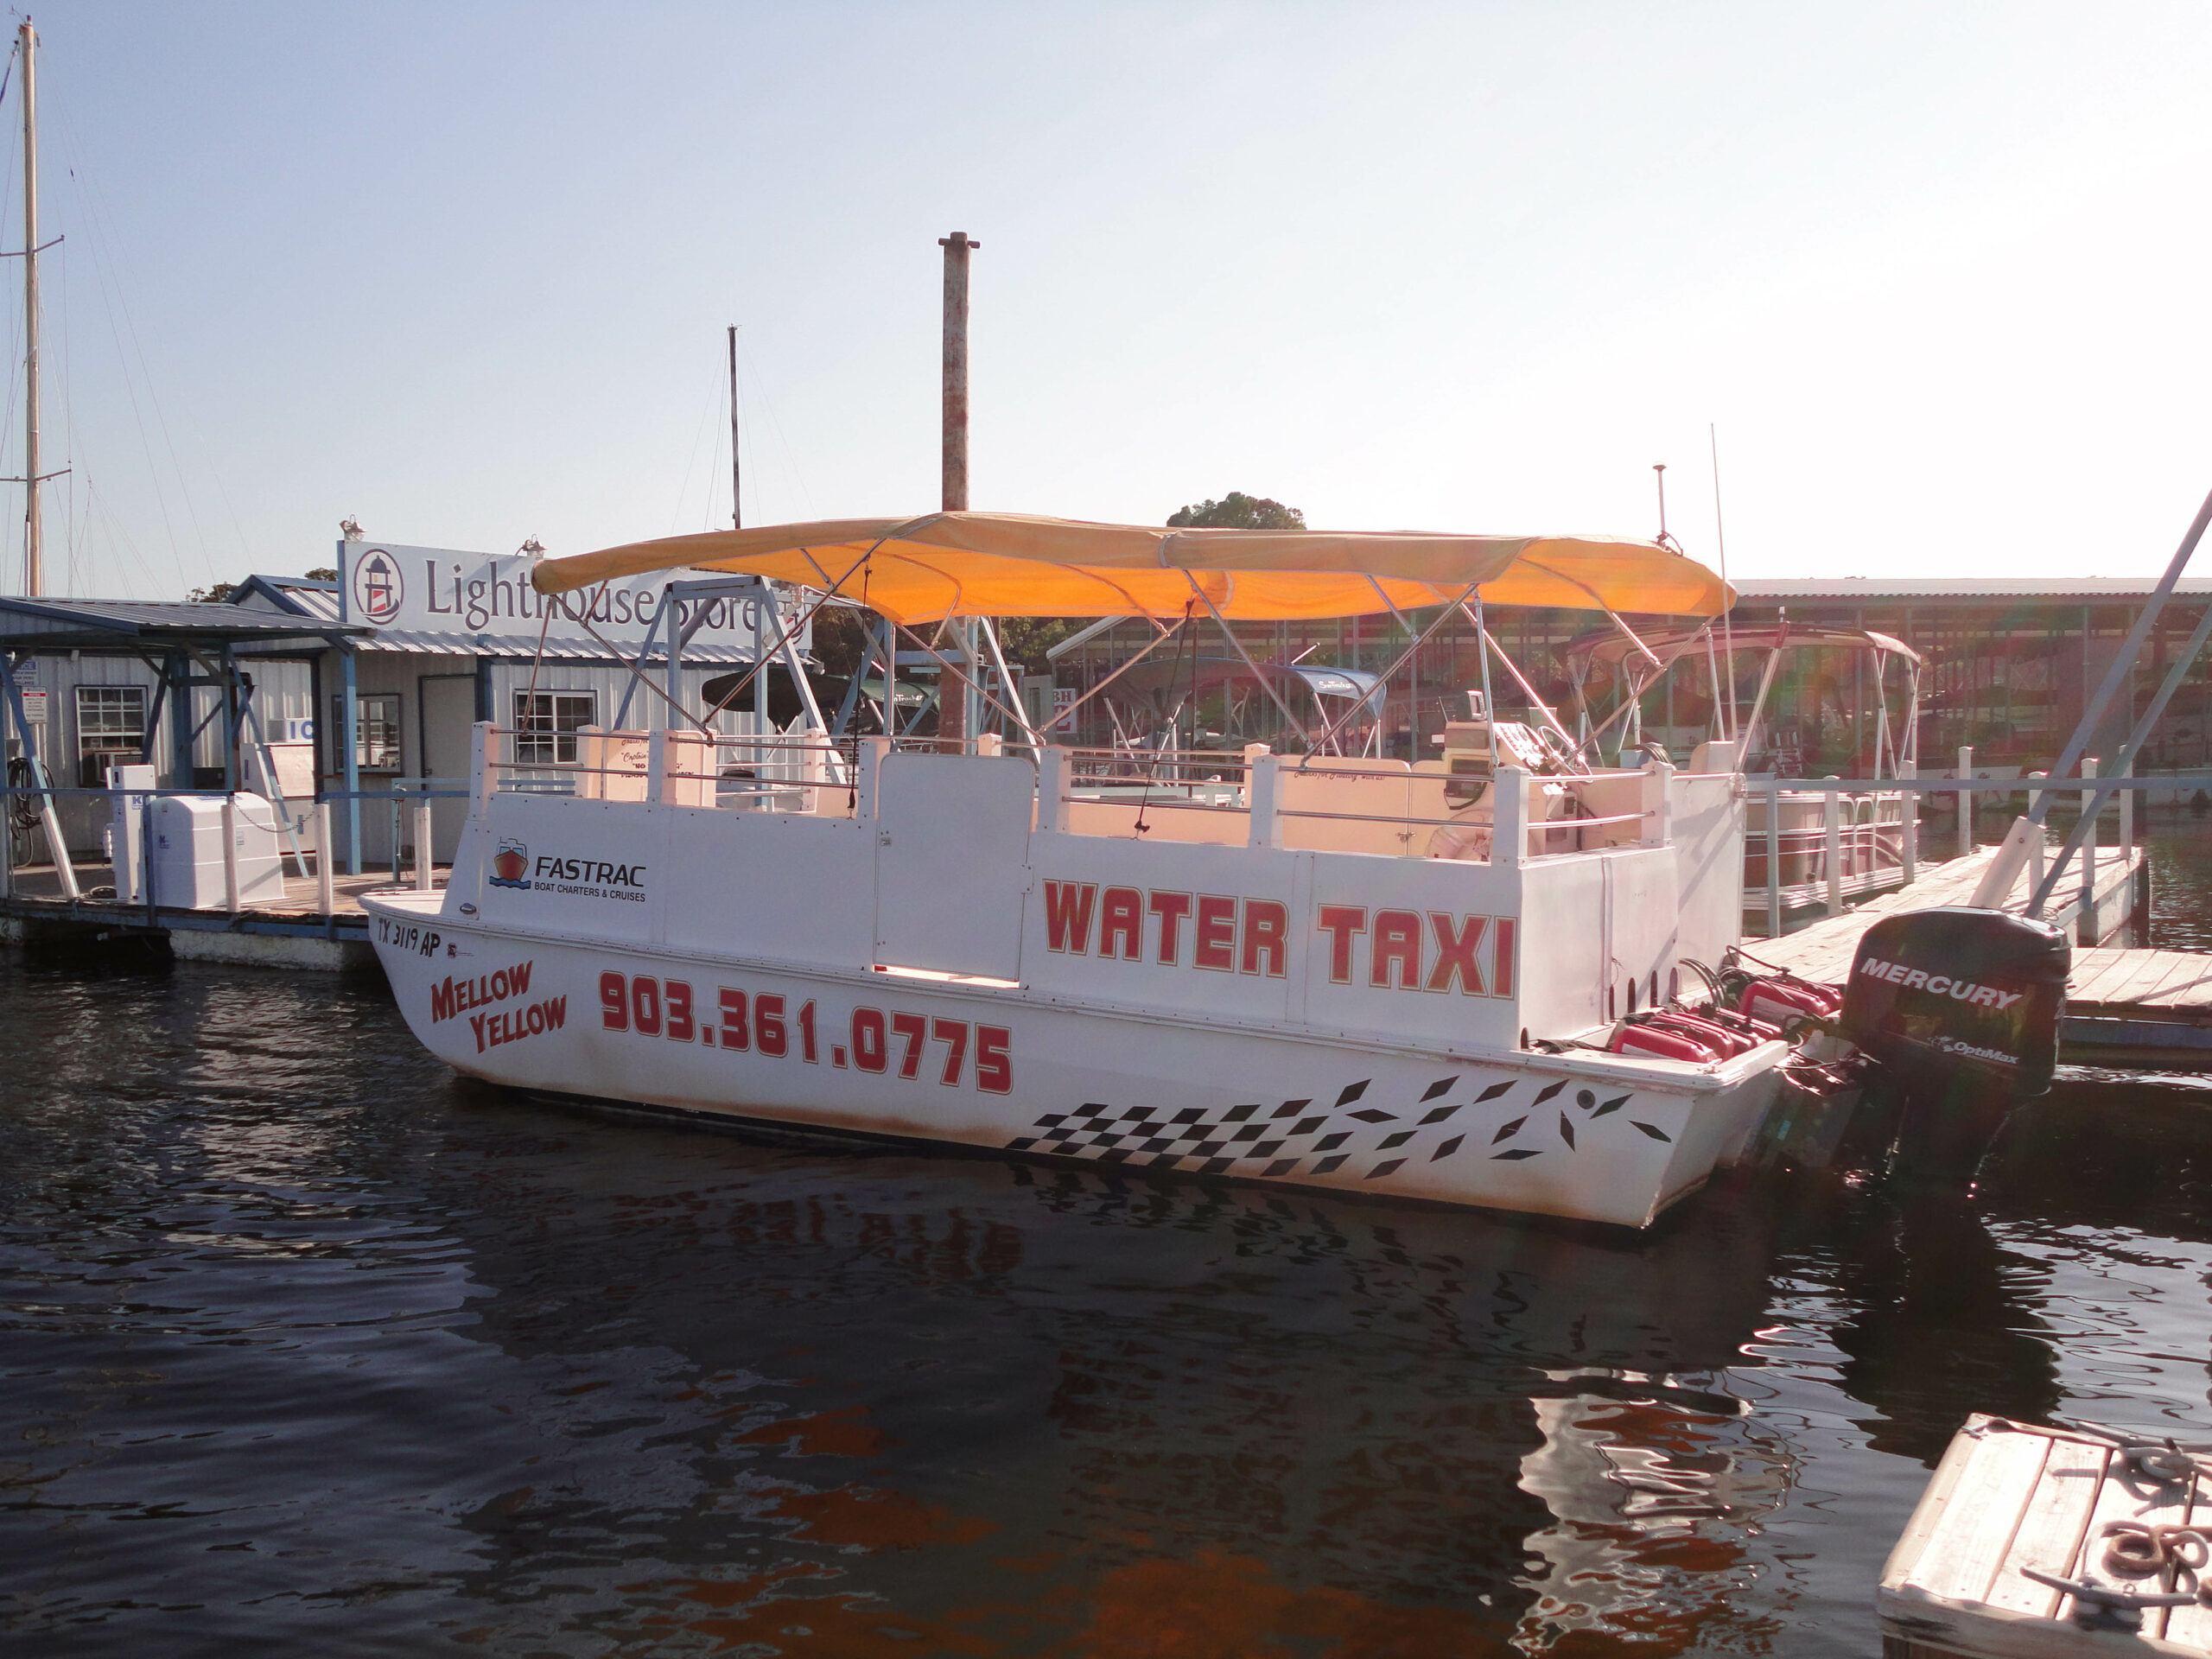 Water Taxi: On-demand water transportation services on Lake Texoma. 2560x1920 HD Wallpaper.